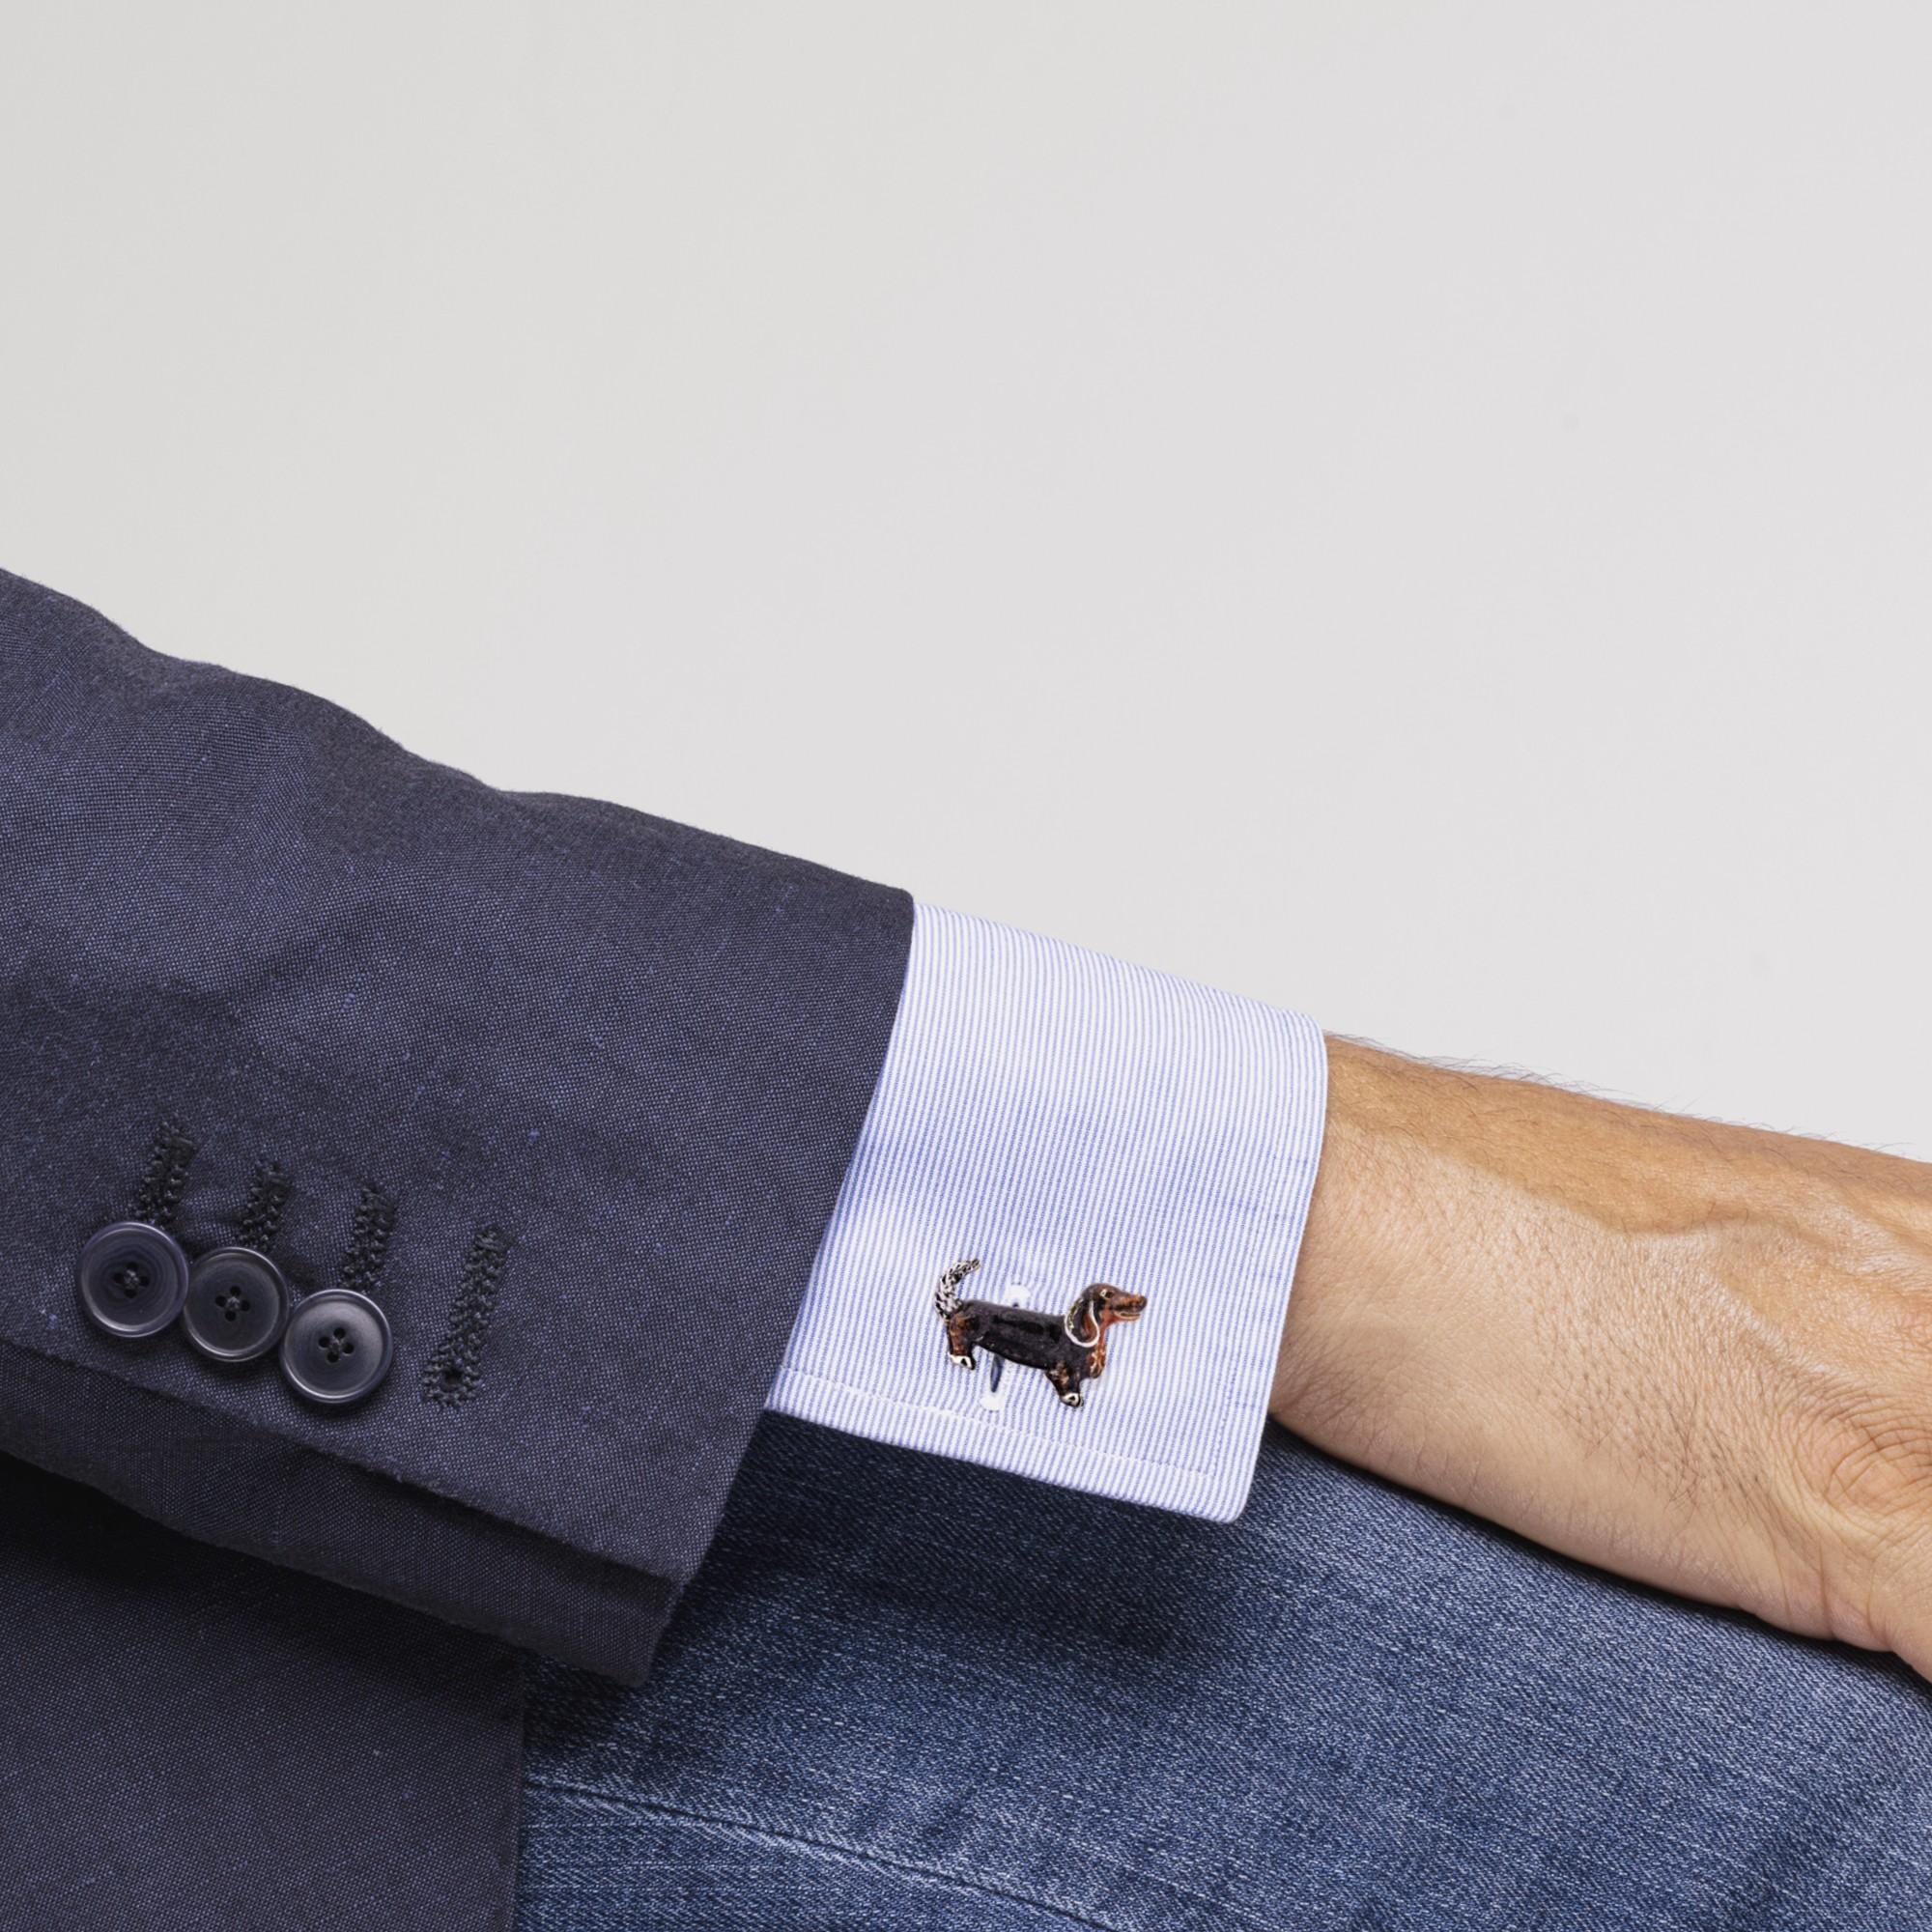 Alex Jona design collection, hand crafted in Italy, sterling silver Dachshund dog cufflinks with enamel. 
Alex Jona cufflinks stand out, not only for their special design and for the excellent quality, but also for the careful attention given to